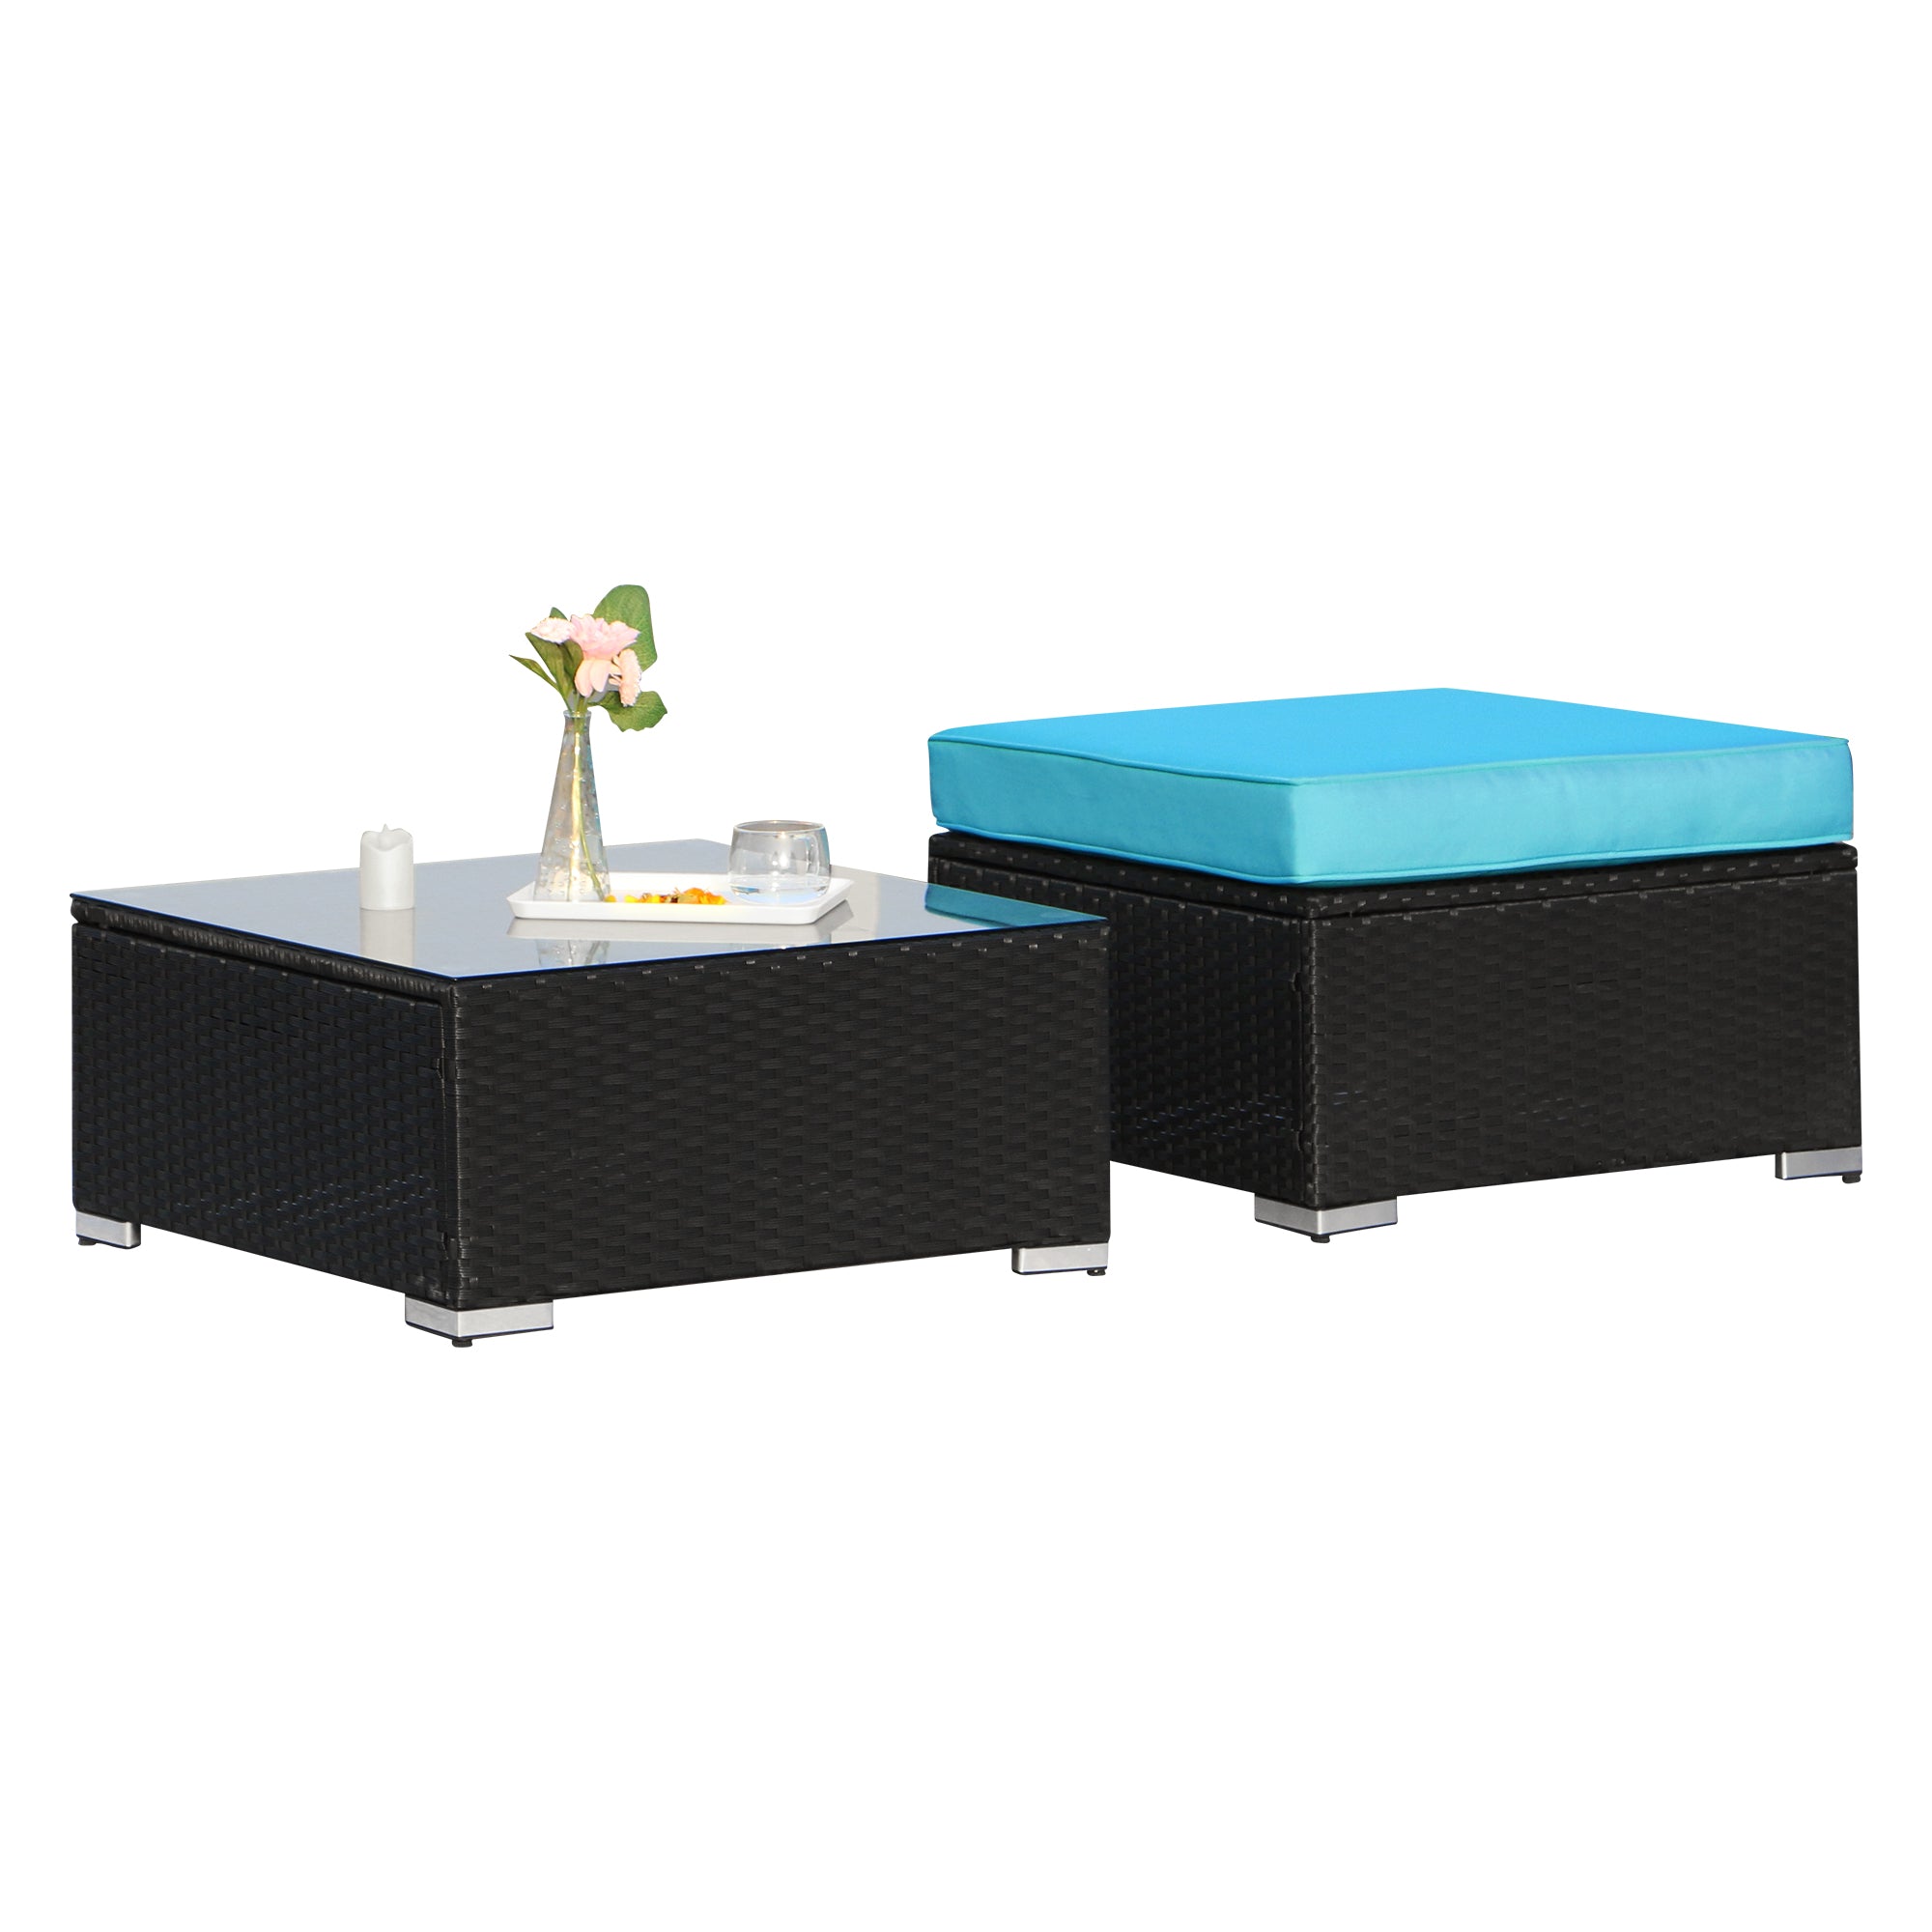 2 Pieces Sectional Ottoman with Coffee Table, Turquoise Cushions